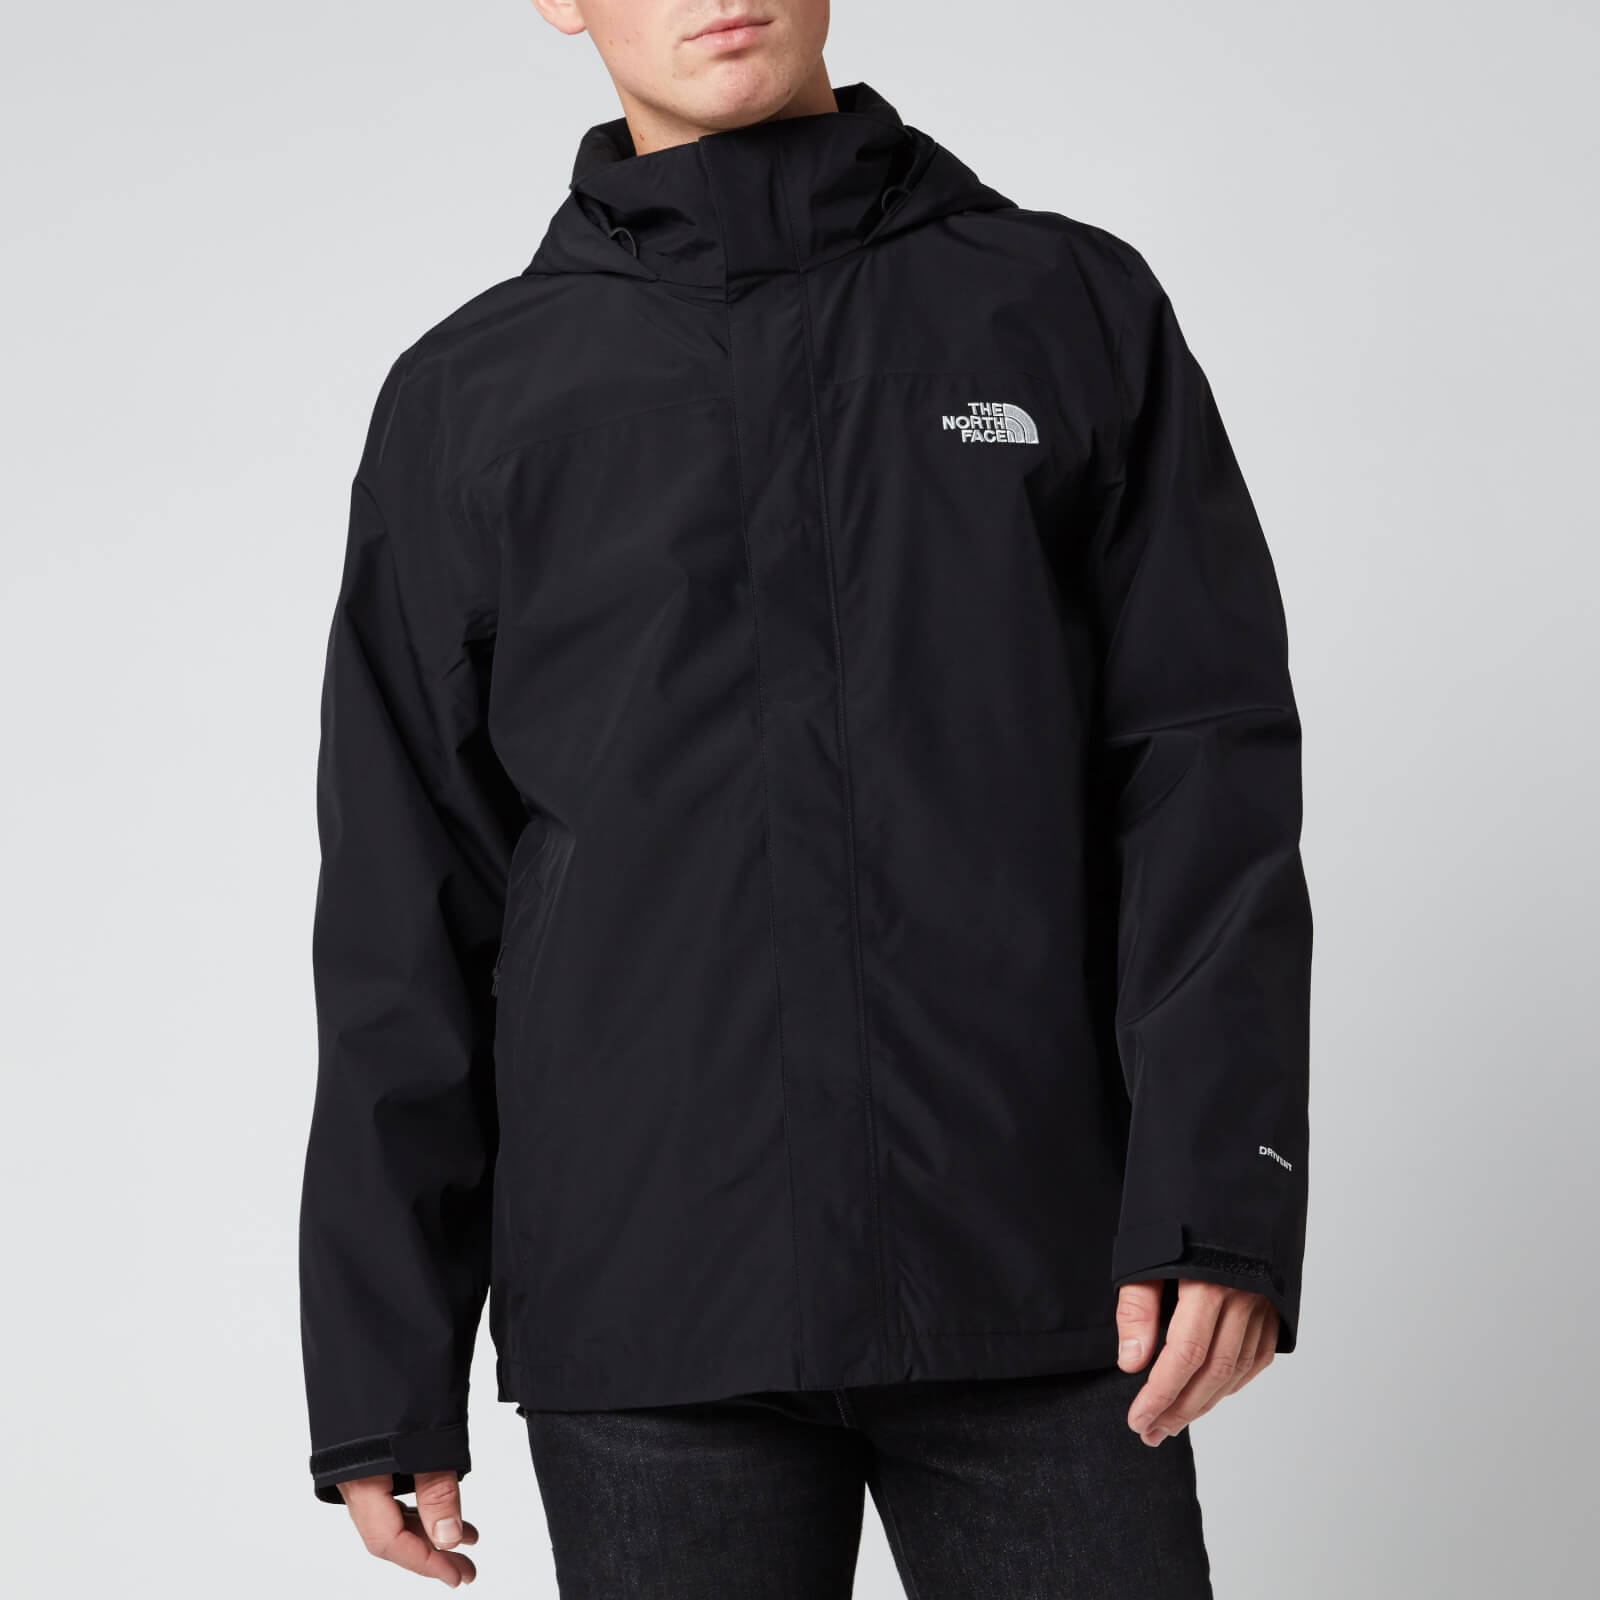 north face sangro review